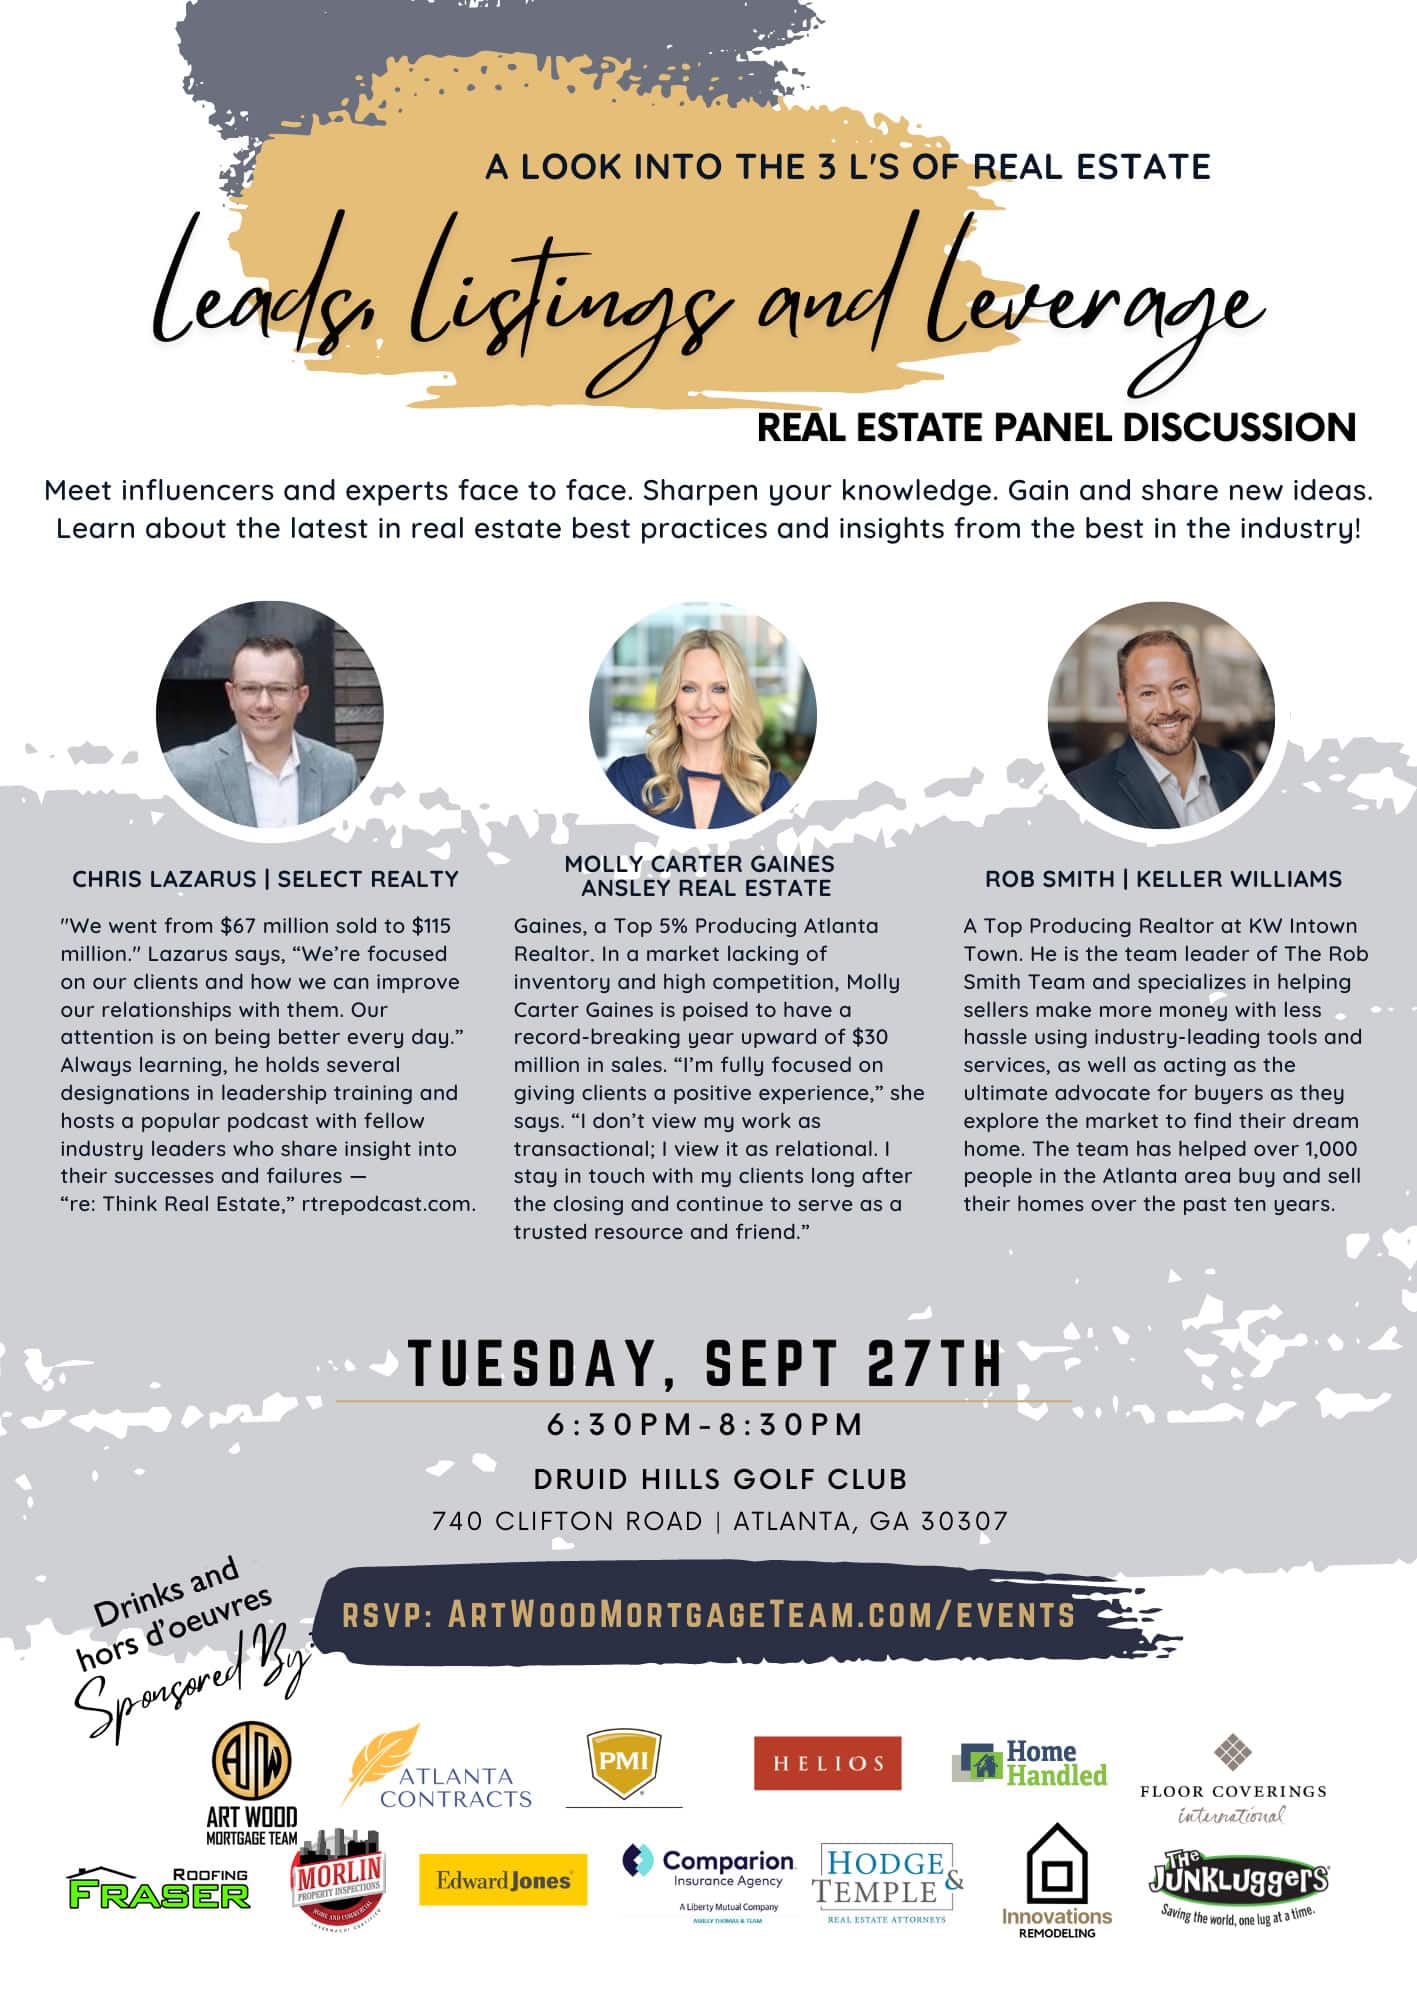 Real Estate Agent Happy Hour and Panel Discussion - September 27, 2022